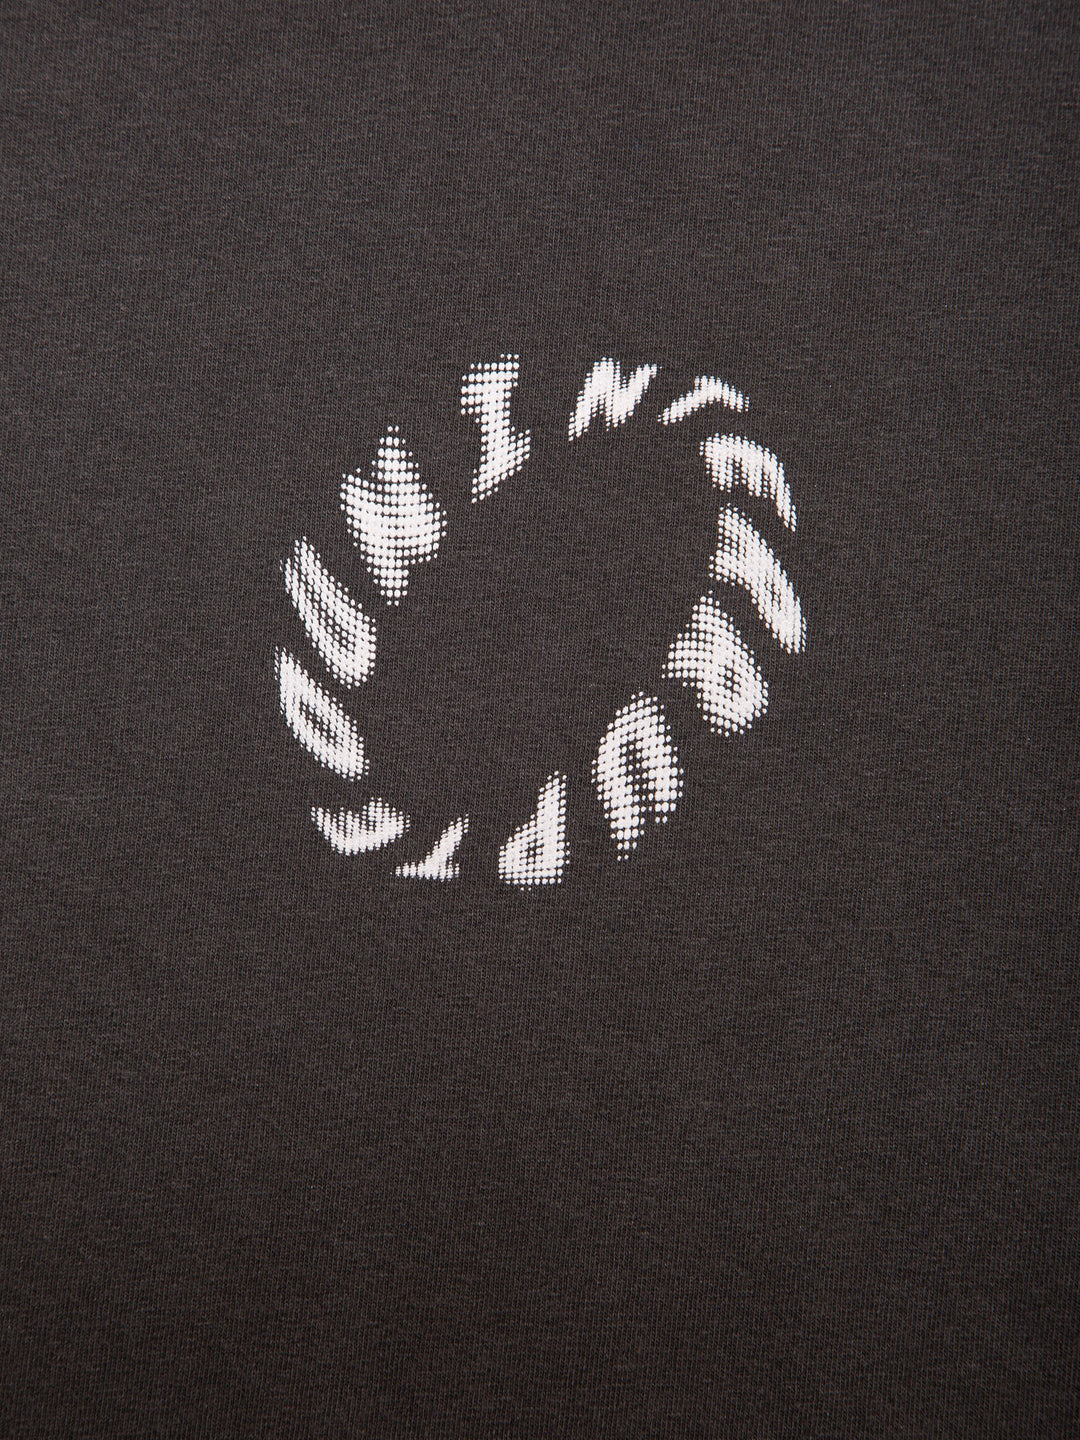 MORE THAN PIXELATED ATTRIBUTE TEE VINTAGE BLACK - close up of pixelated logo